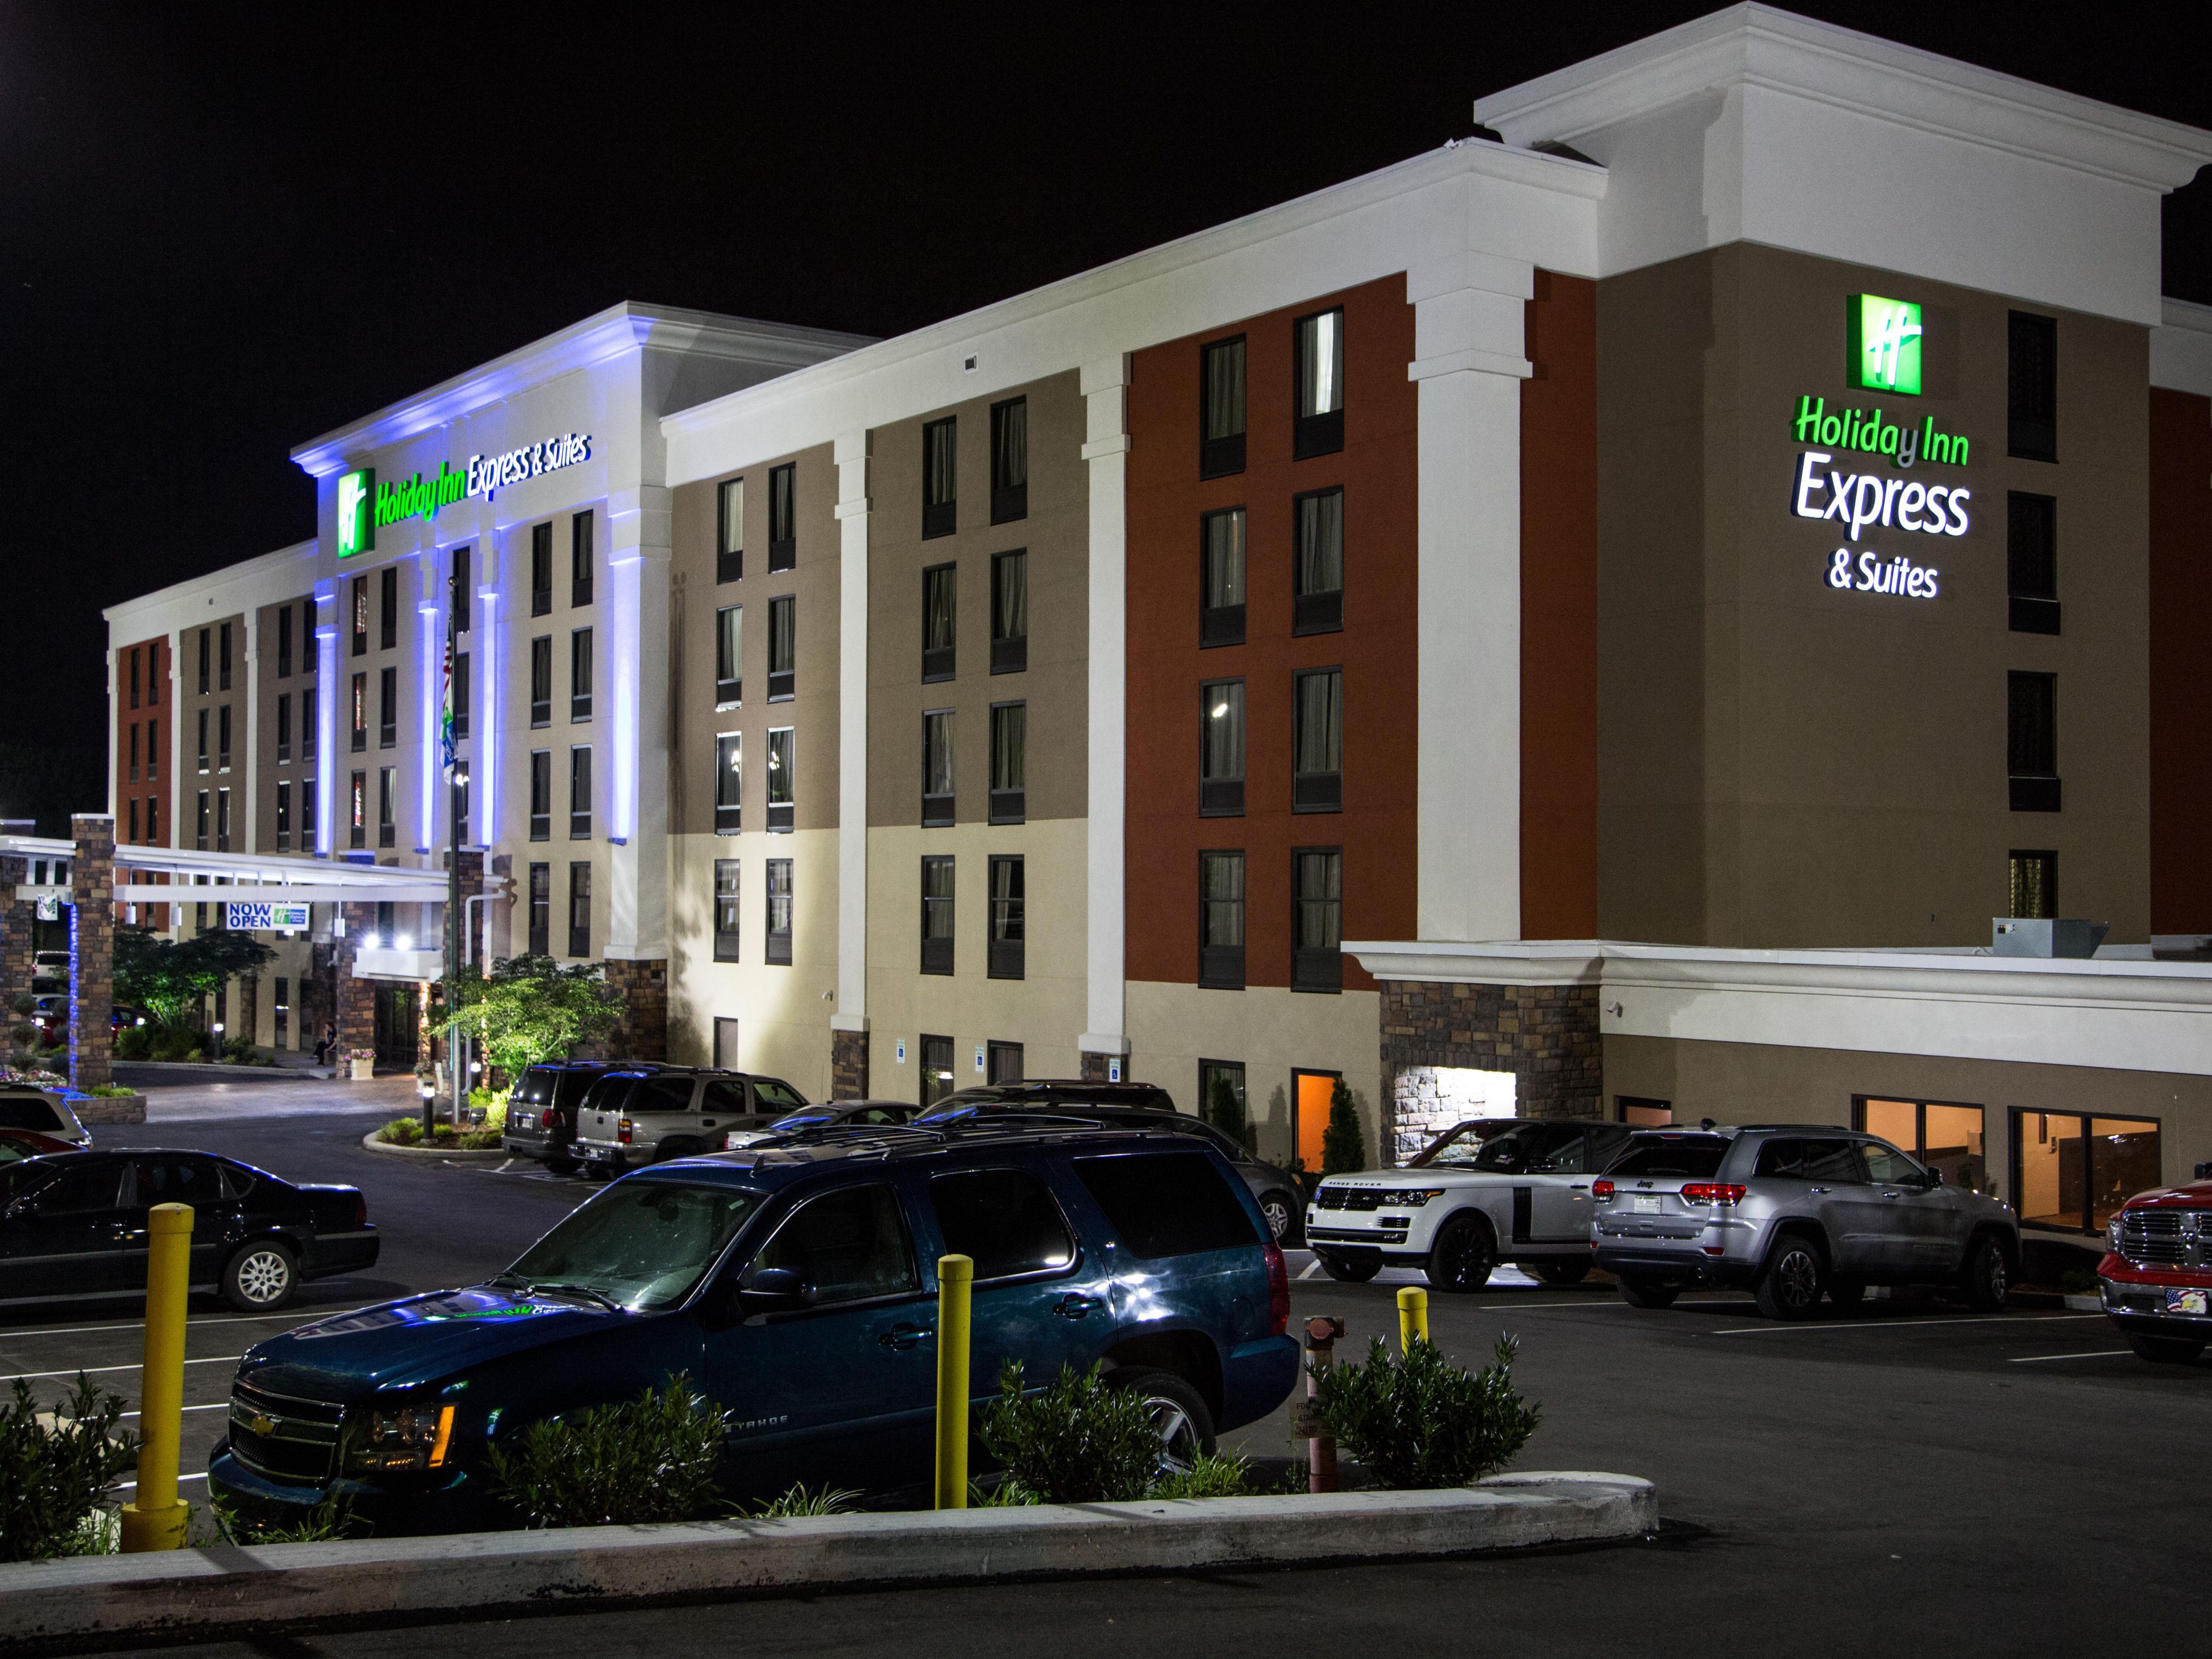 Holiday Inn Express And Suites Nashville 3956709106 4x3